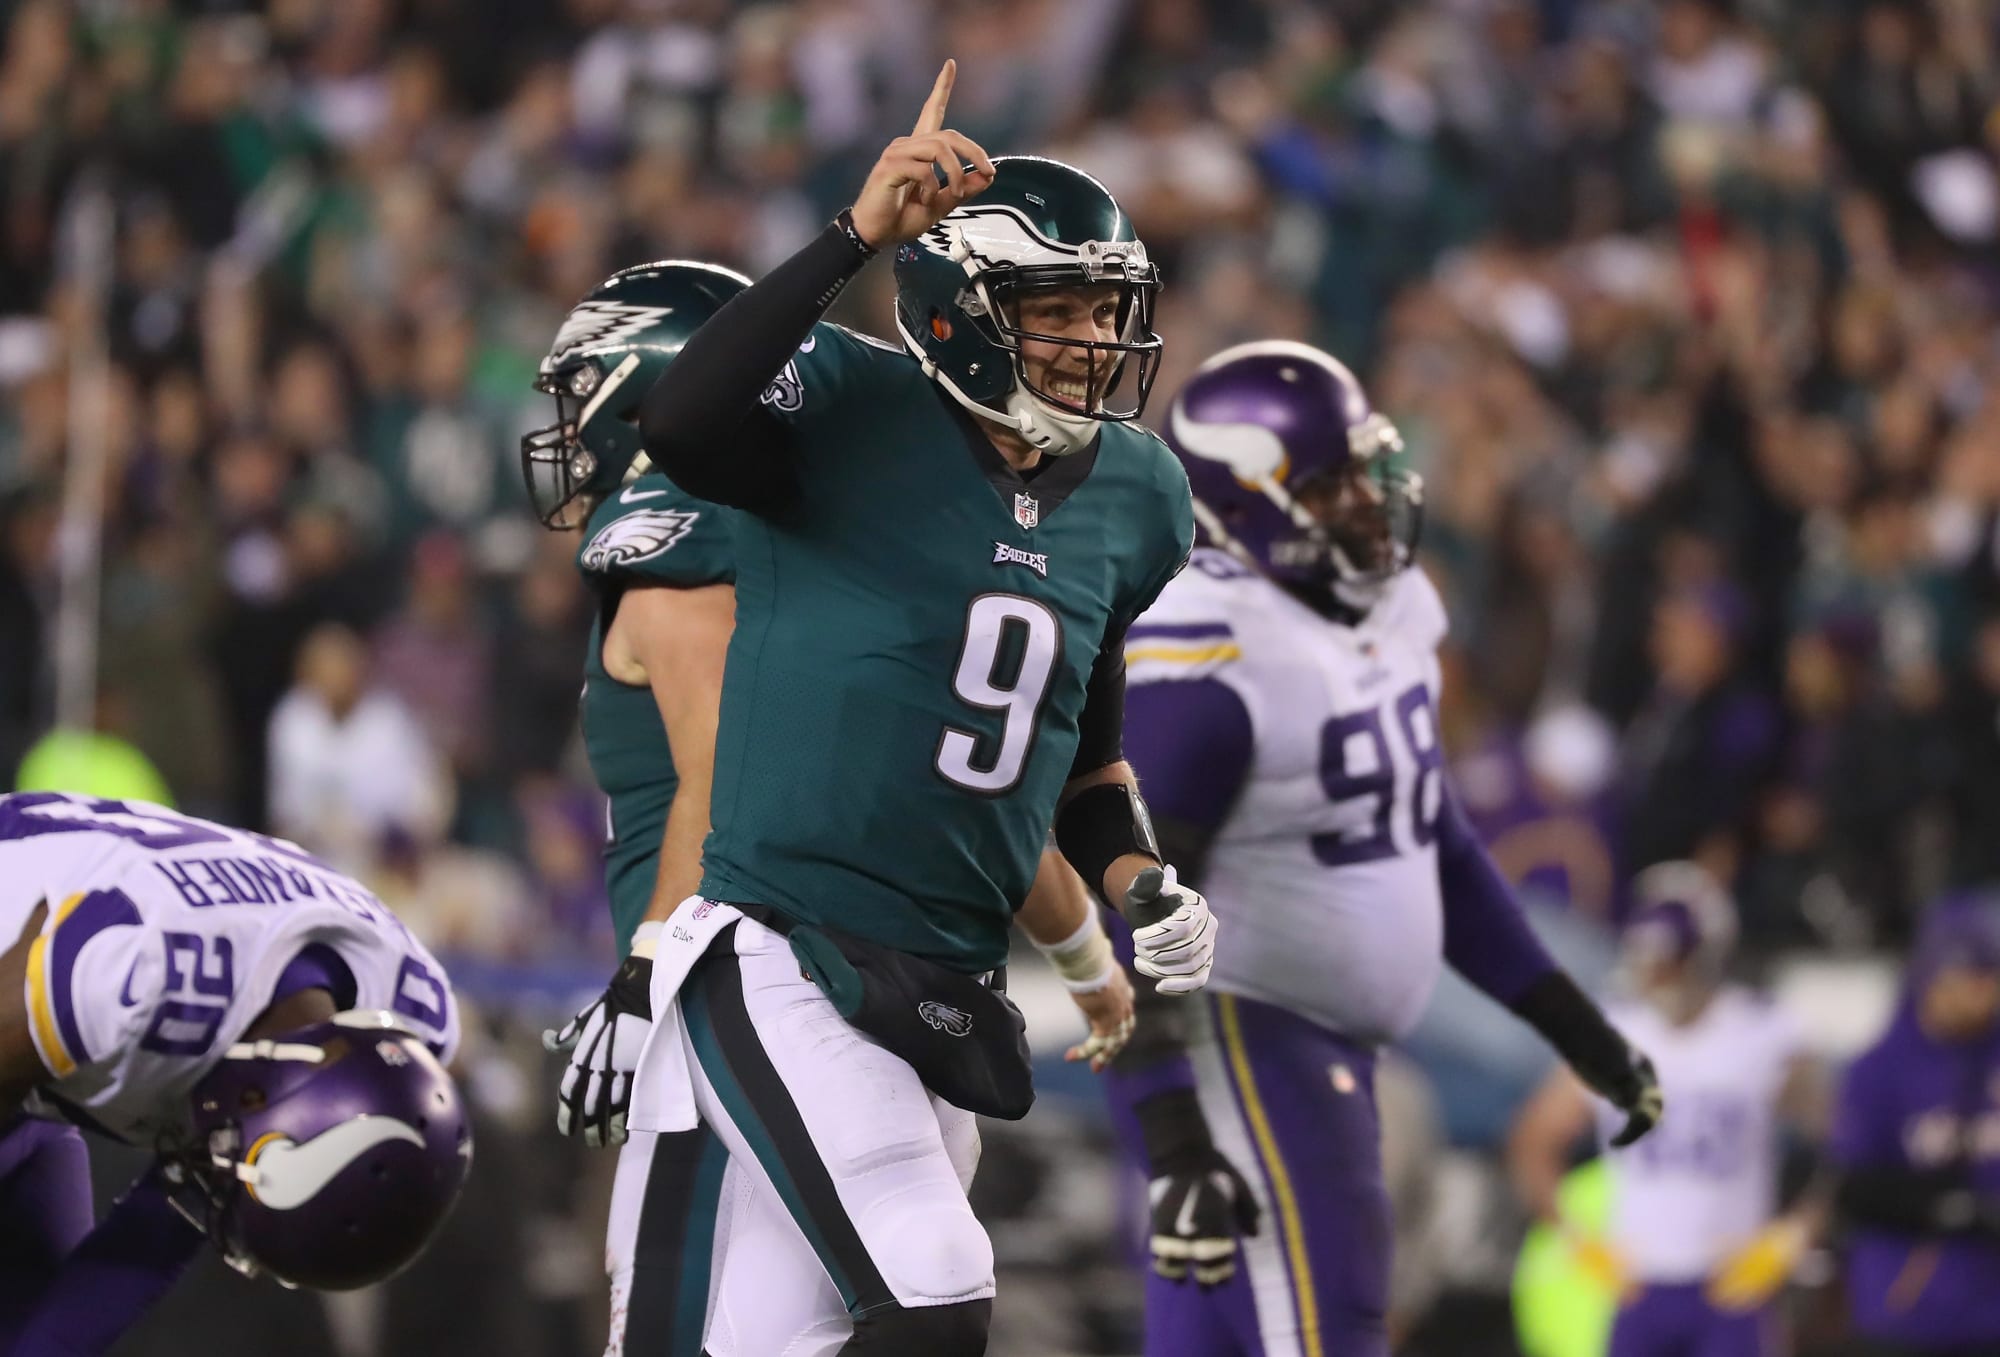 Vikings vs. Eagles Highlights, game tracker from NFC Championship